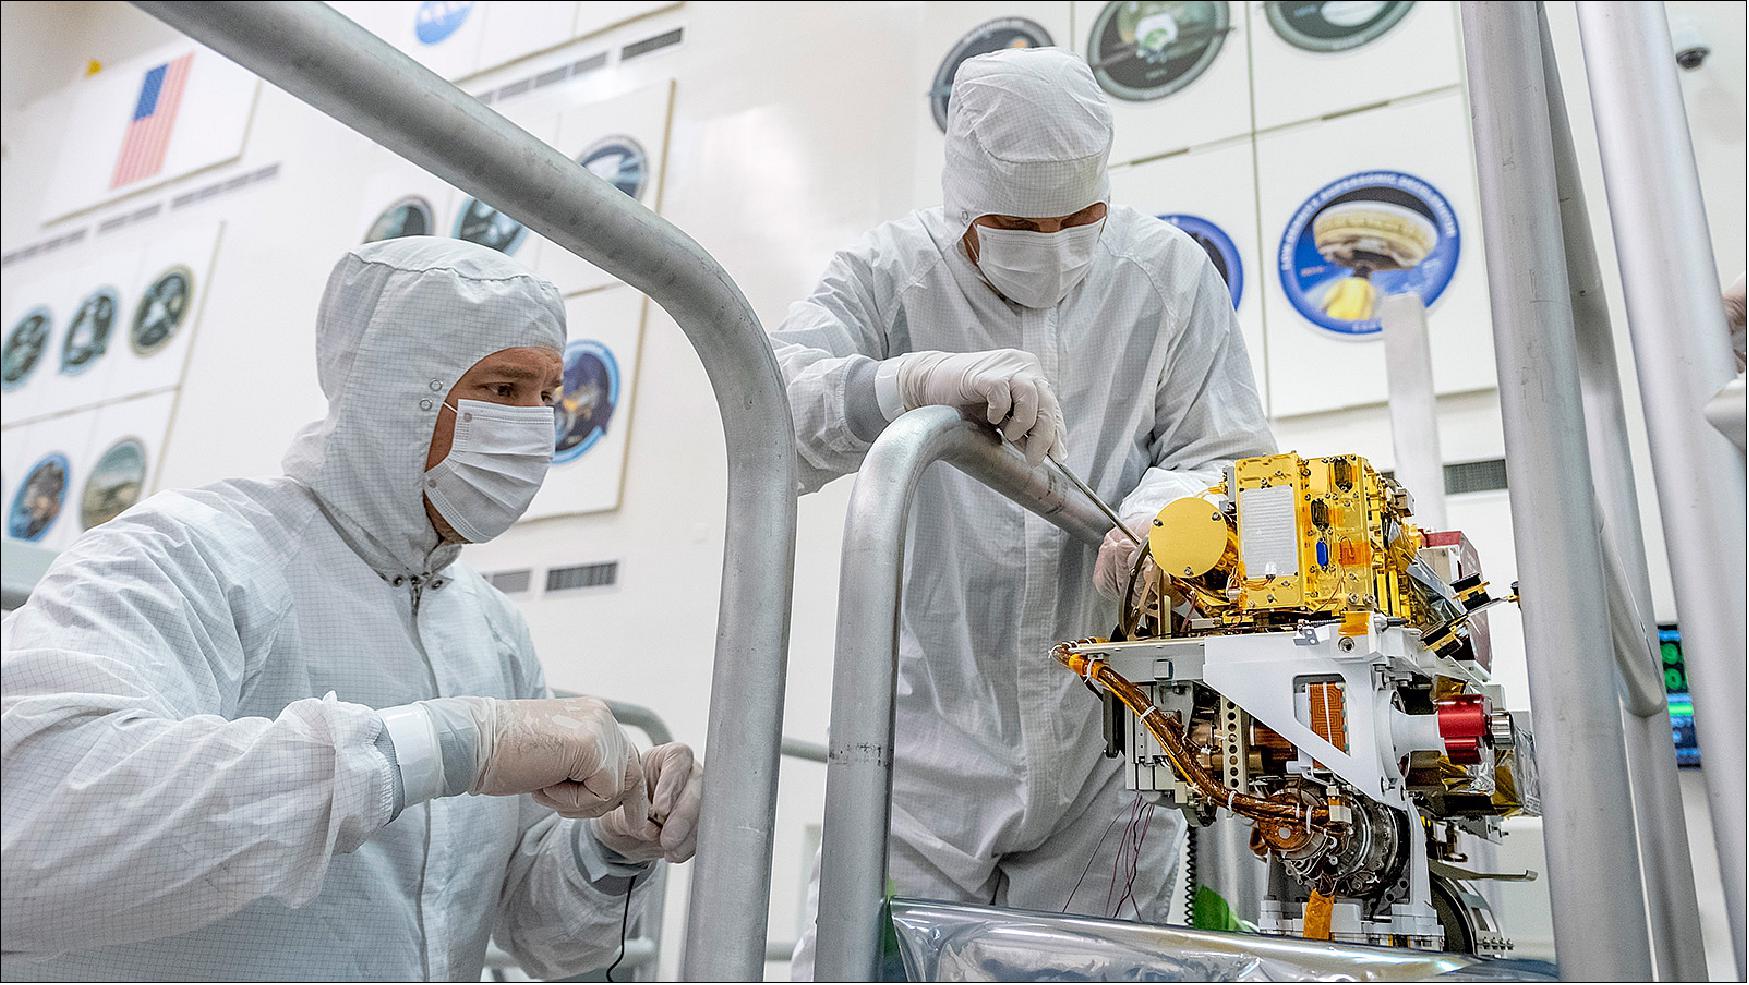 Figure 5: In this image taken June 25, 2019, engineers install the SuperCam instrument on Mars 2020's rover. This image was taken in the Spacecraft Assembly Facility at NASA's Jet Propulsion Laboratory, Pasadena, California (image credit: NASA/JPL-Caltech)